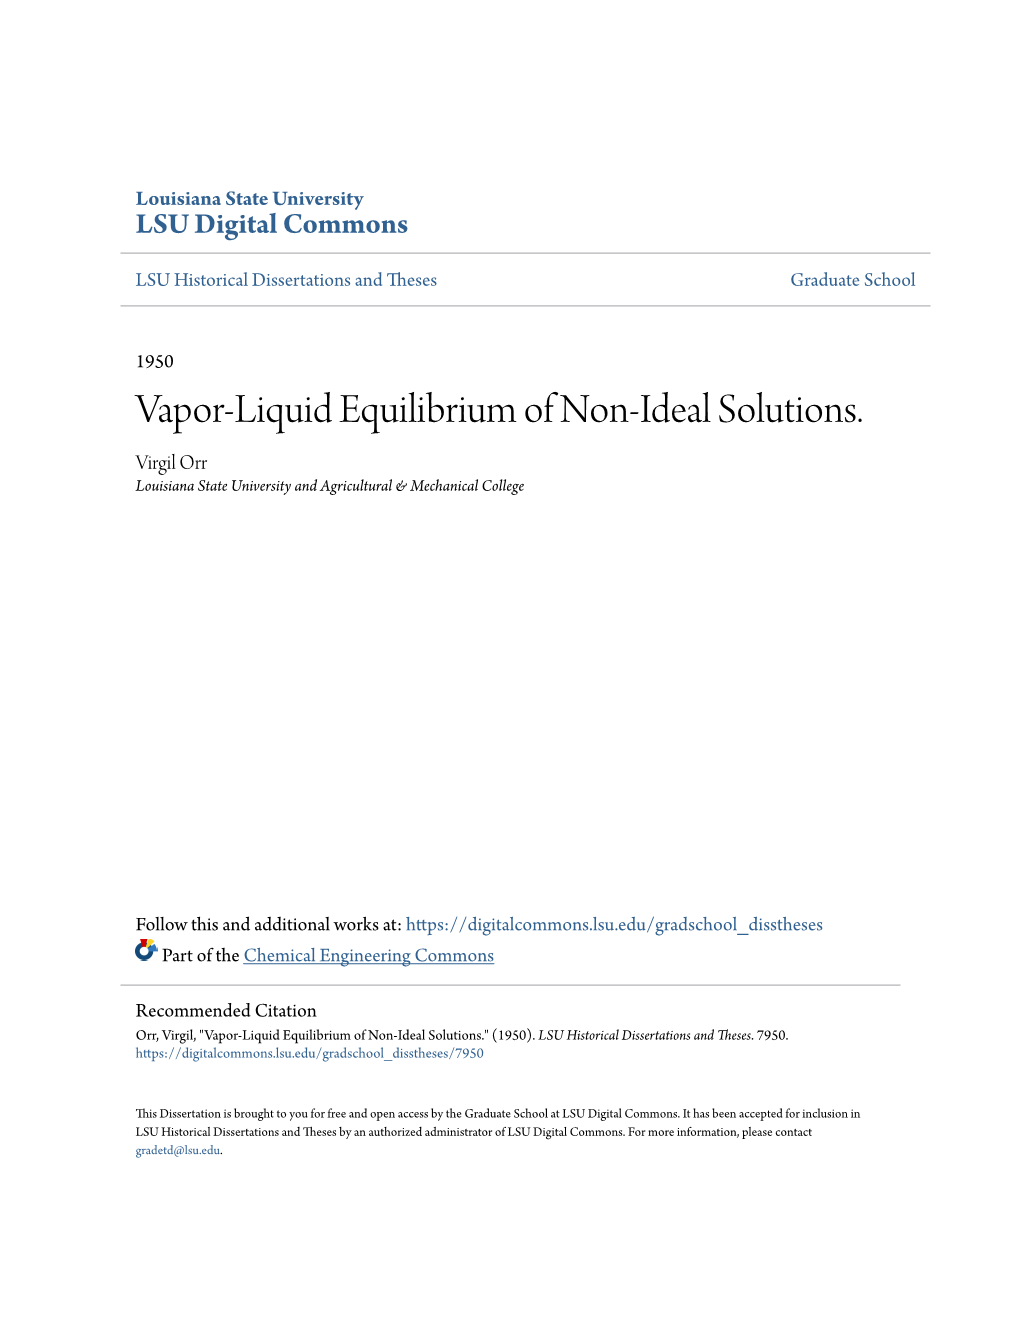 Vapor-Liquid Equilibrium of Non-Ideal Solutions. Virgil Orr Louisiana State University and Agricultural & Mechanical College